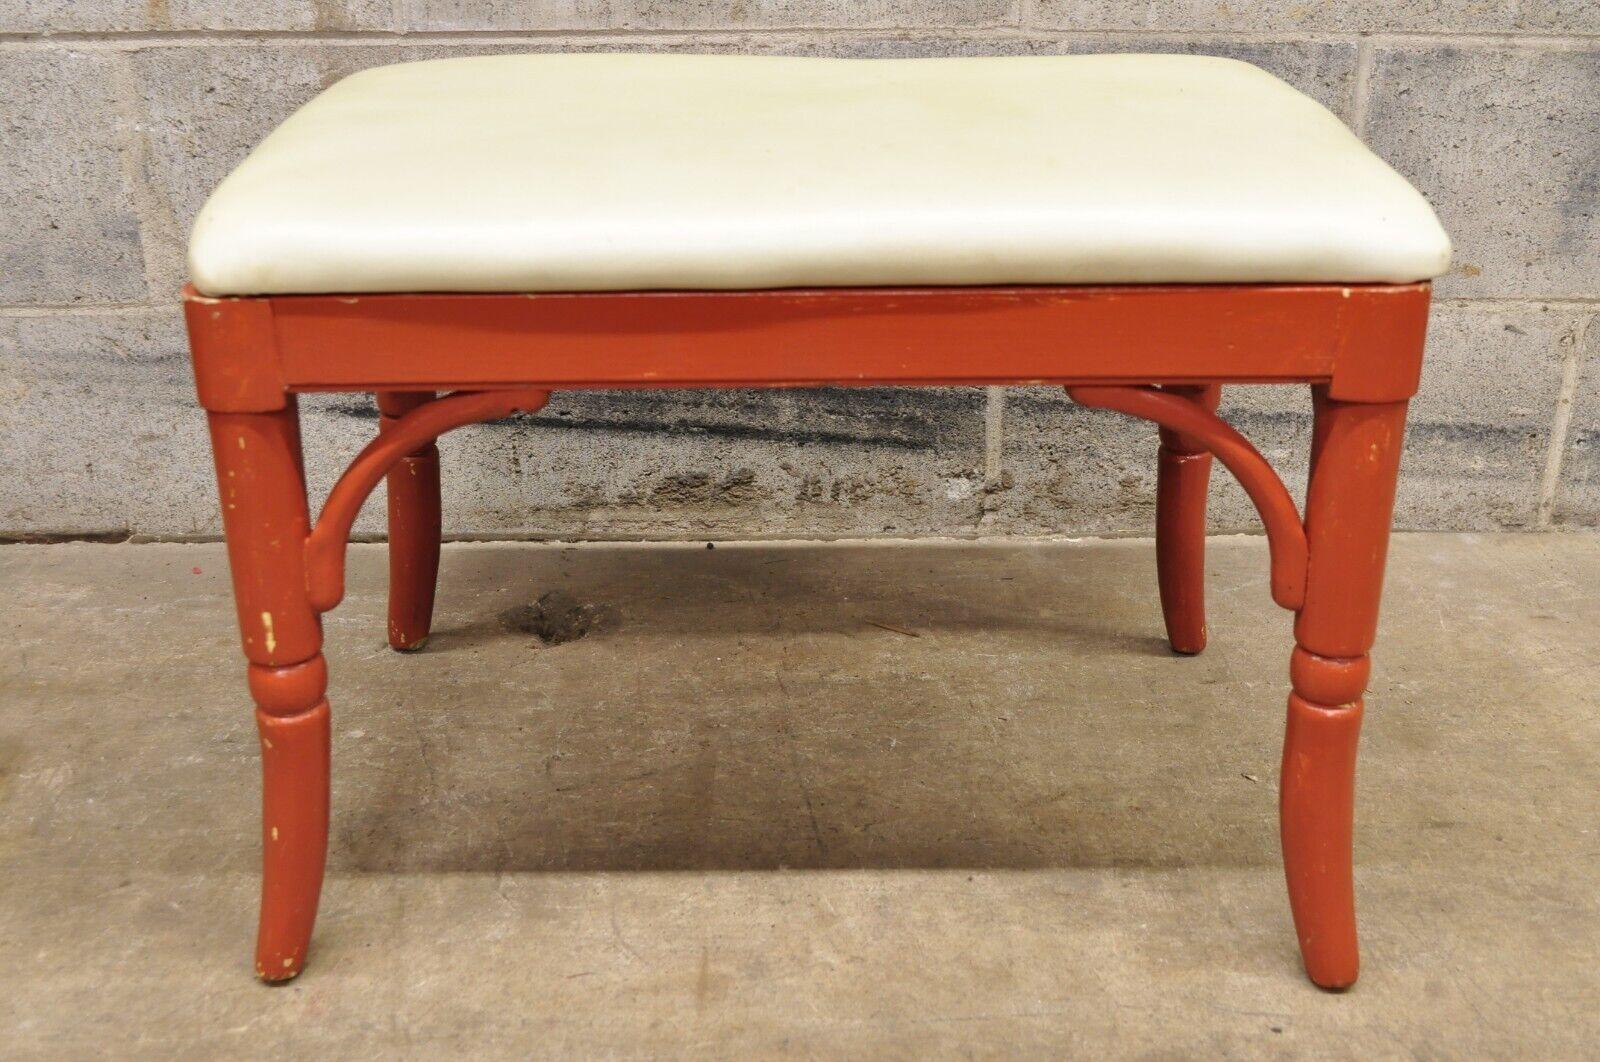 Thomasville Allegro Faux bamboo Hollywood wood coral painted vanity bench. Item features a faux bamboo base, carved fretwork corners, solid wood frame, original label, great style and form. Circa mid-20th century. Measurements: 16